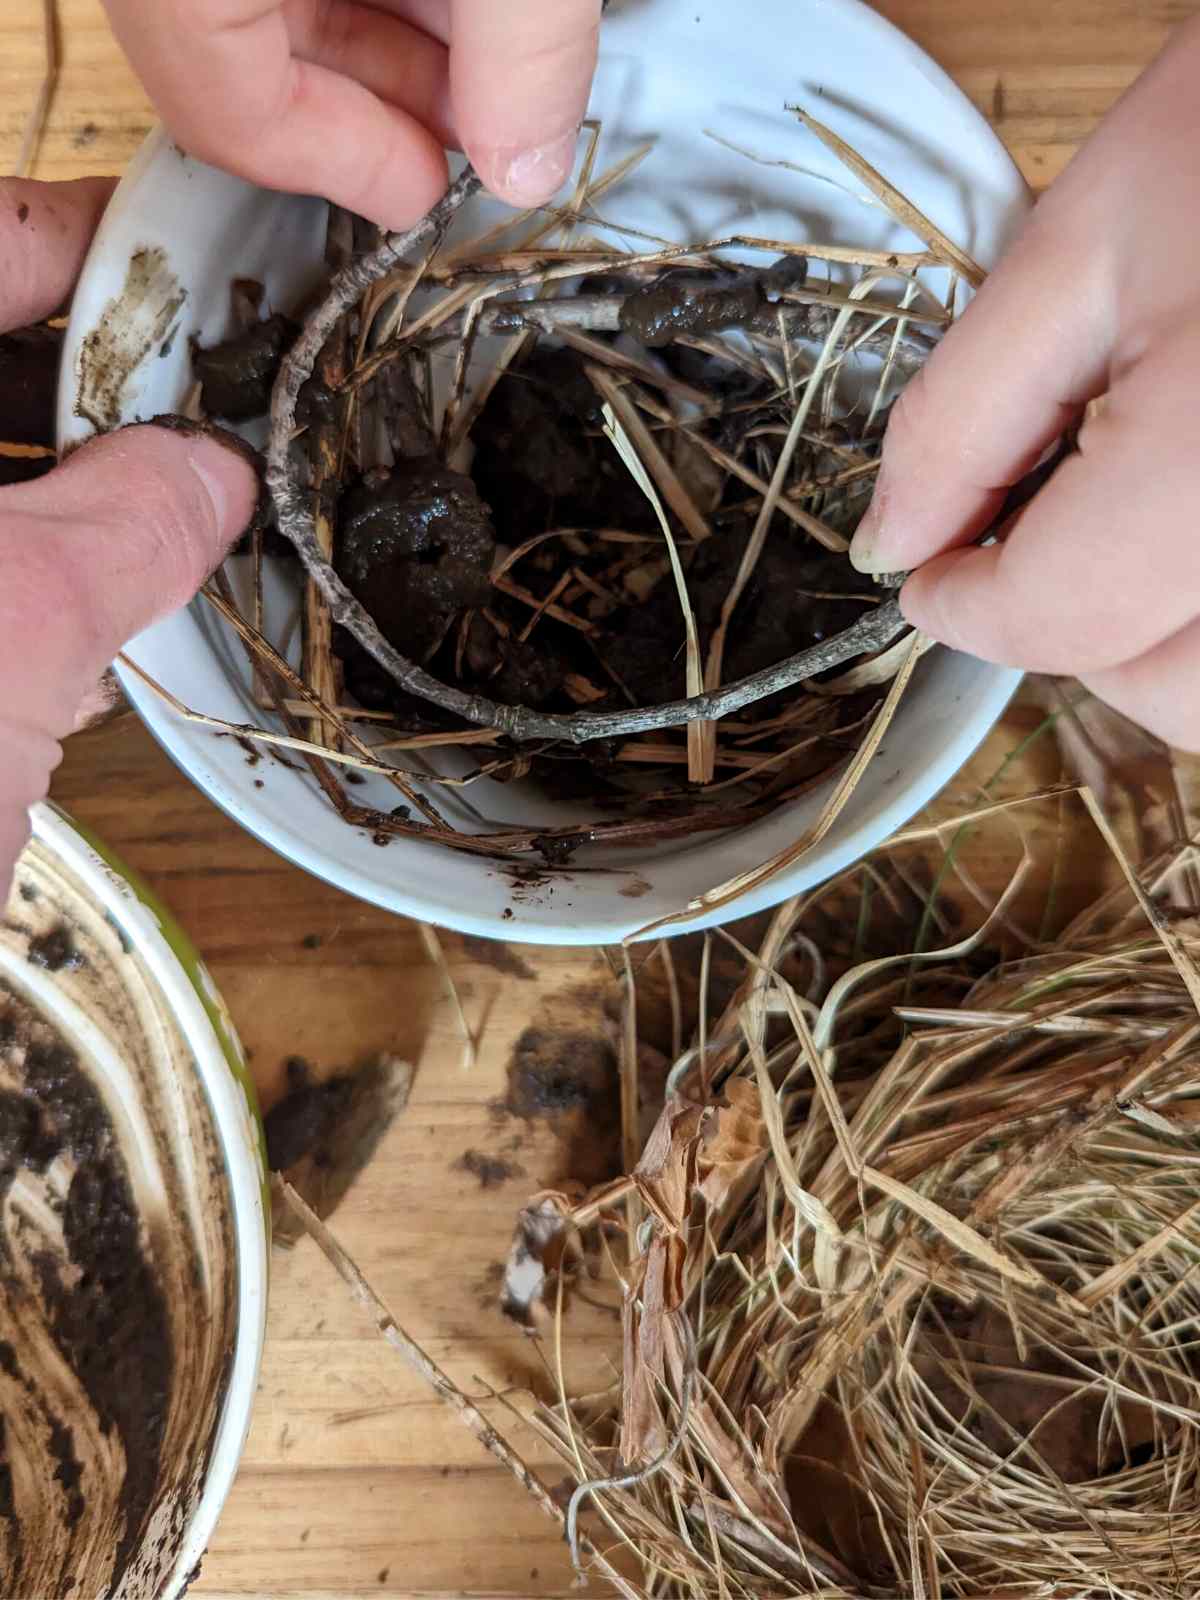 child's hands bending a stick into a bowl with mud and dried grass, adult hand holding the bowl, wooden board below with a birds nest out of dried grasses and a bowl with some mud.